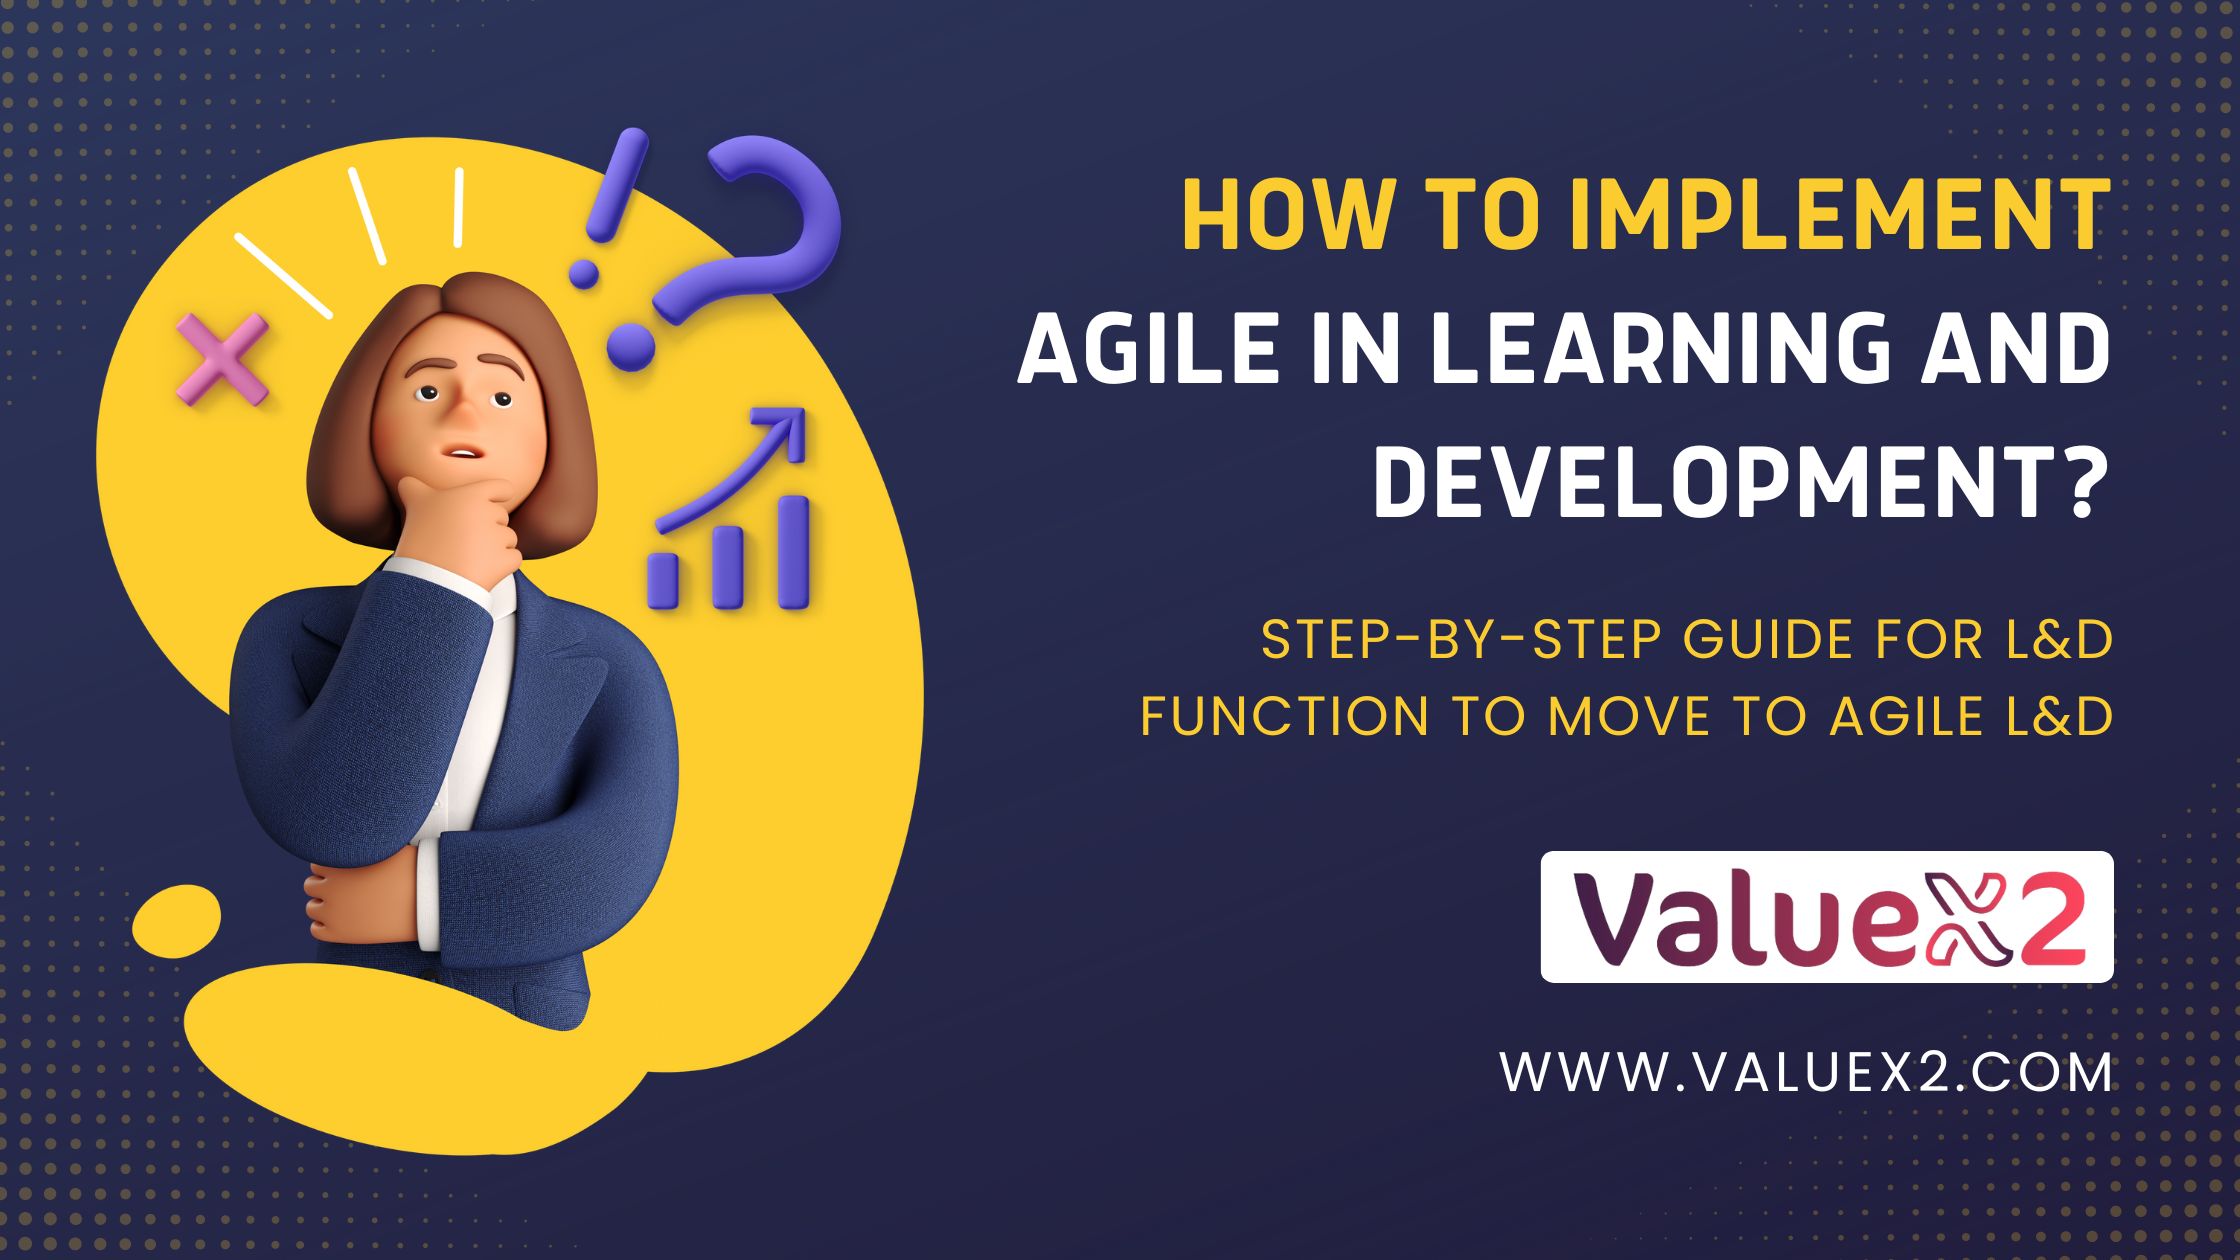 How to Implement Agile in Learning and Development